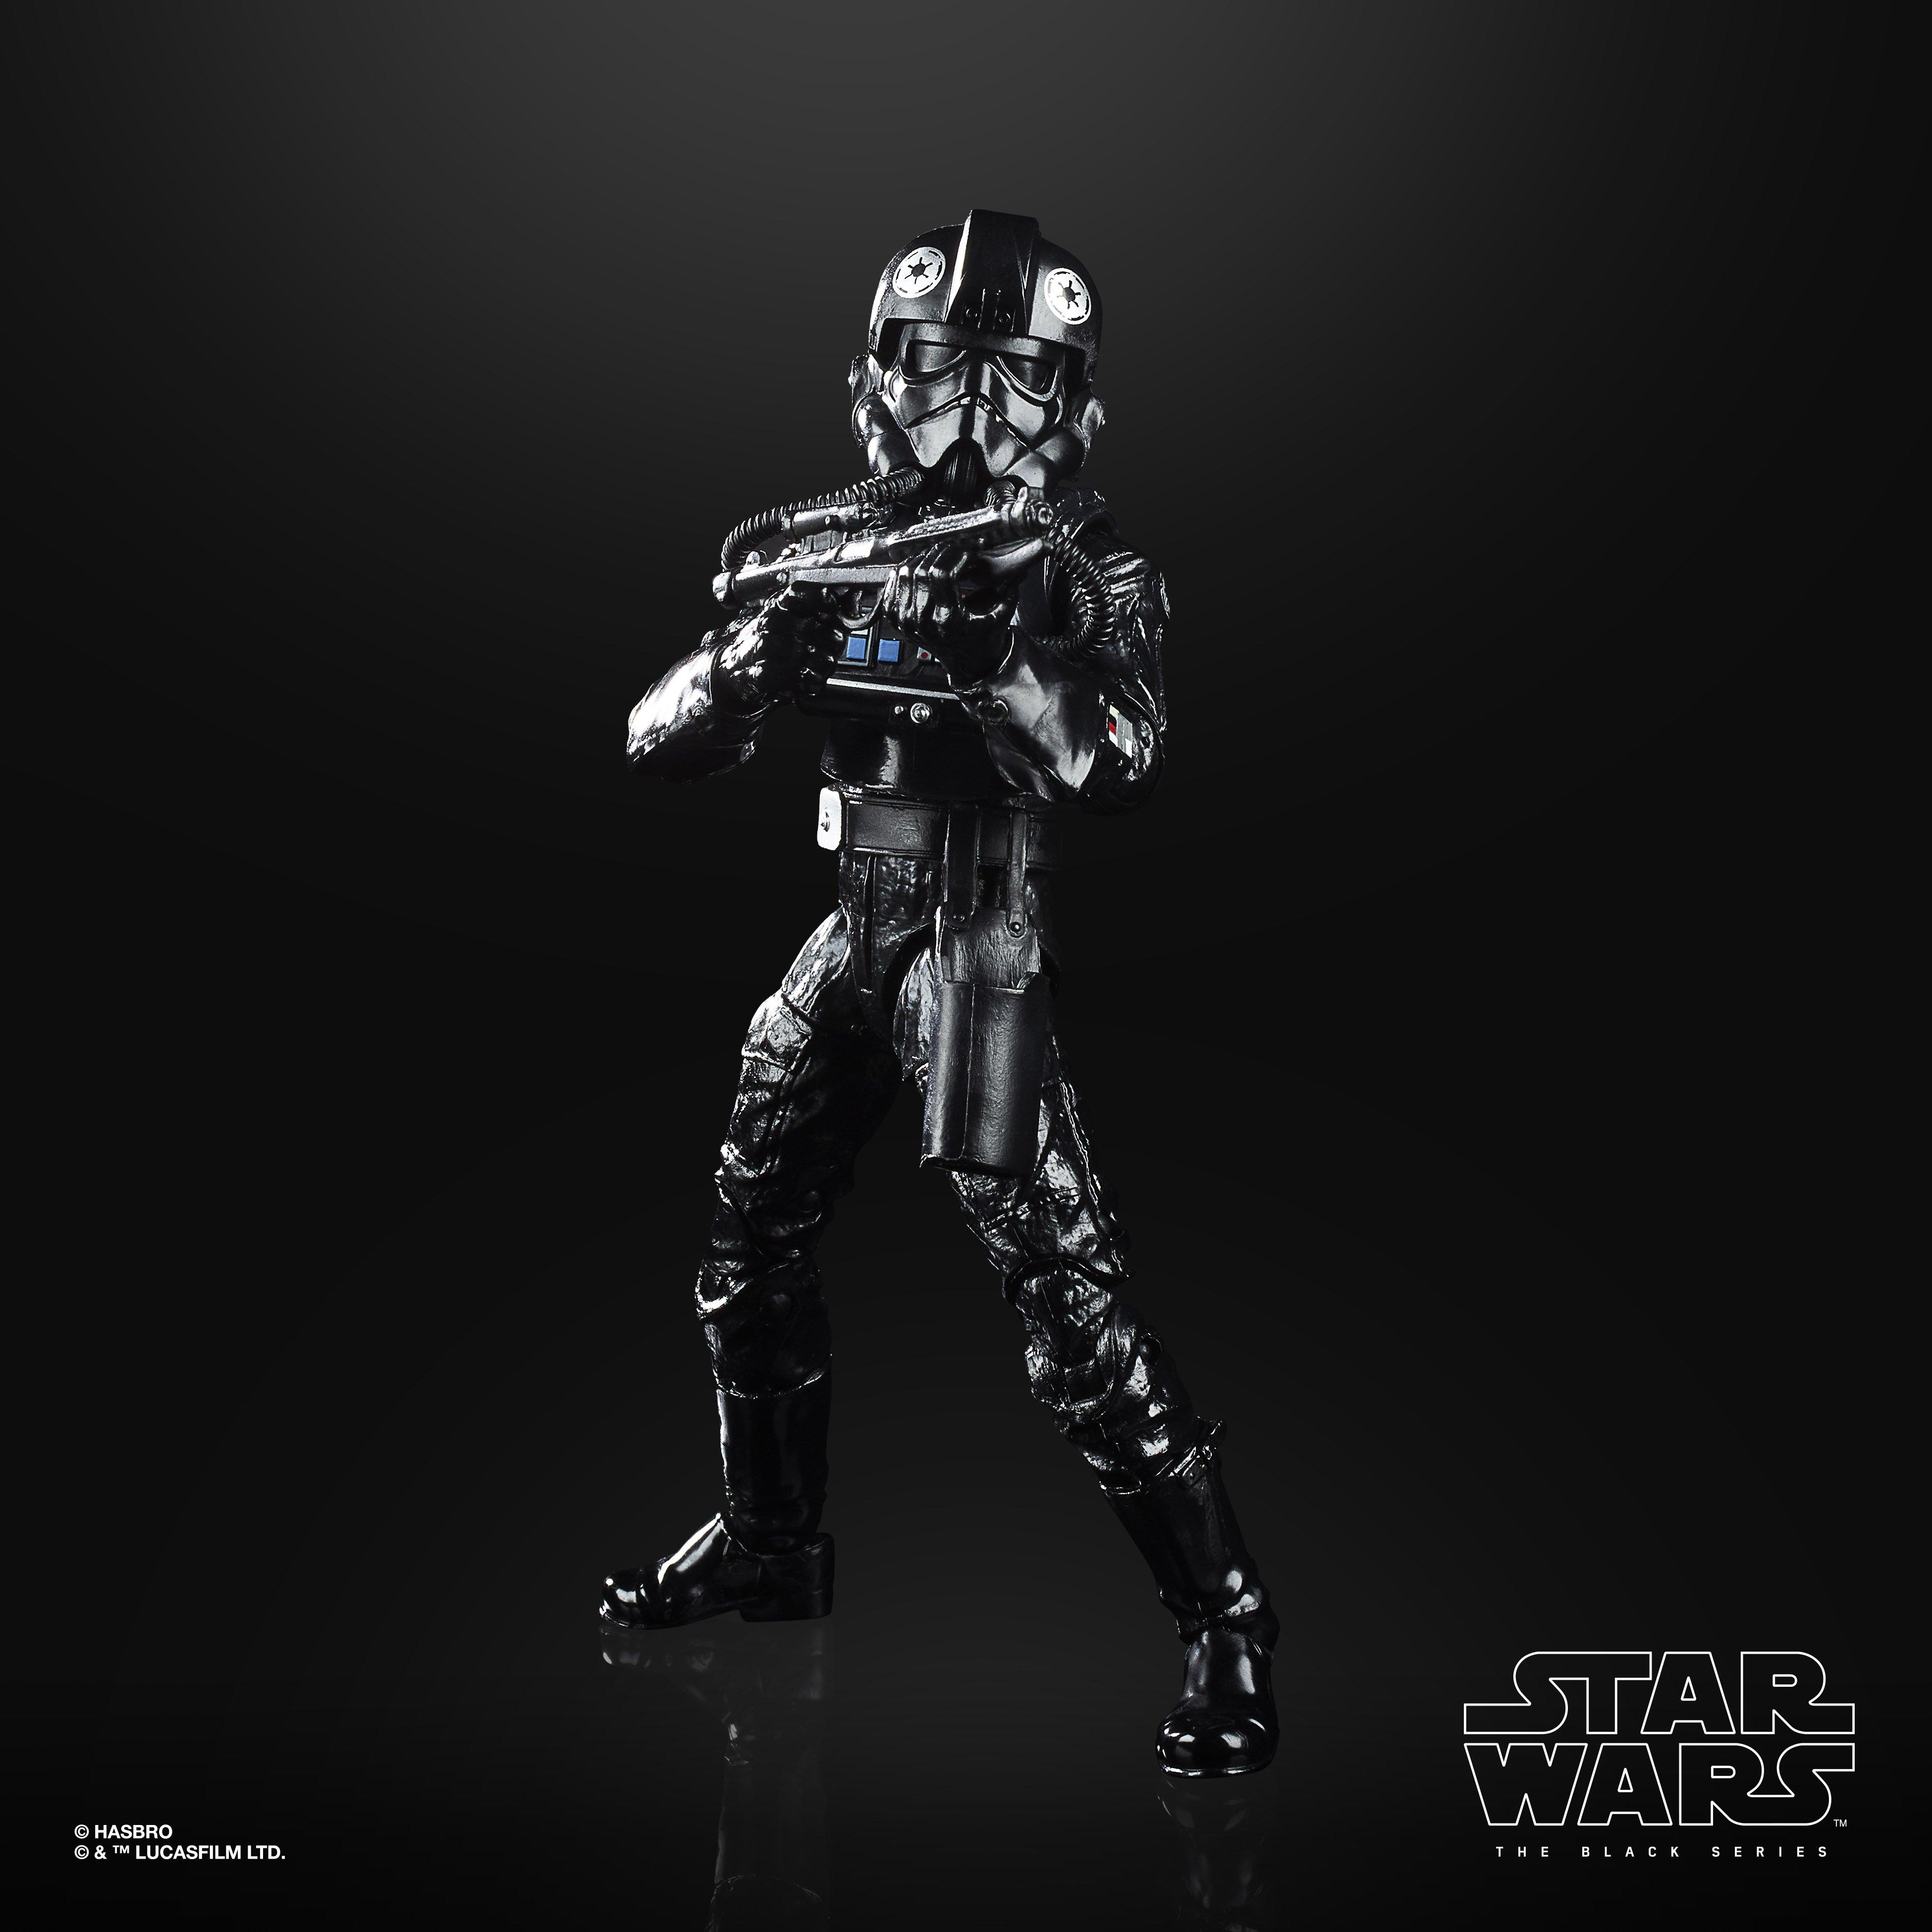 Hasbro Star Wars Episode V: The Empire Strikes Back 40th Anniversary Tie Fighter Pilot 6-in Action Figure